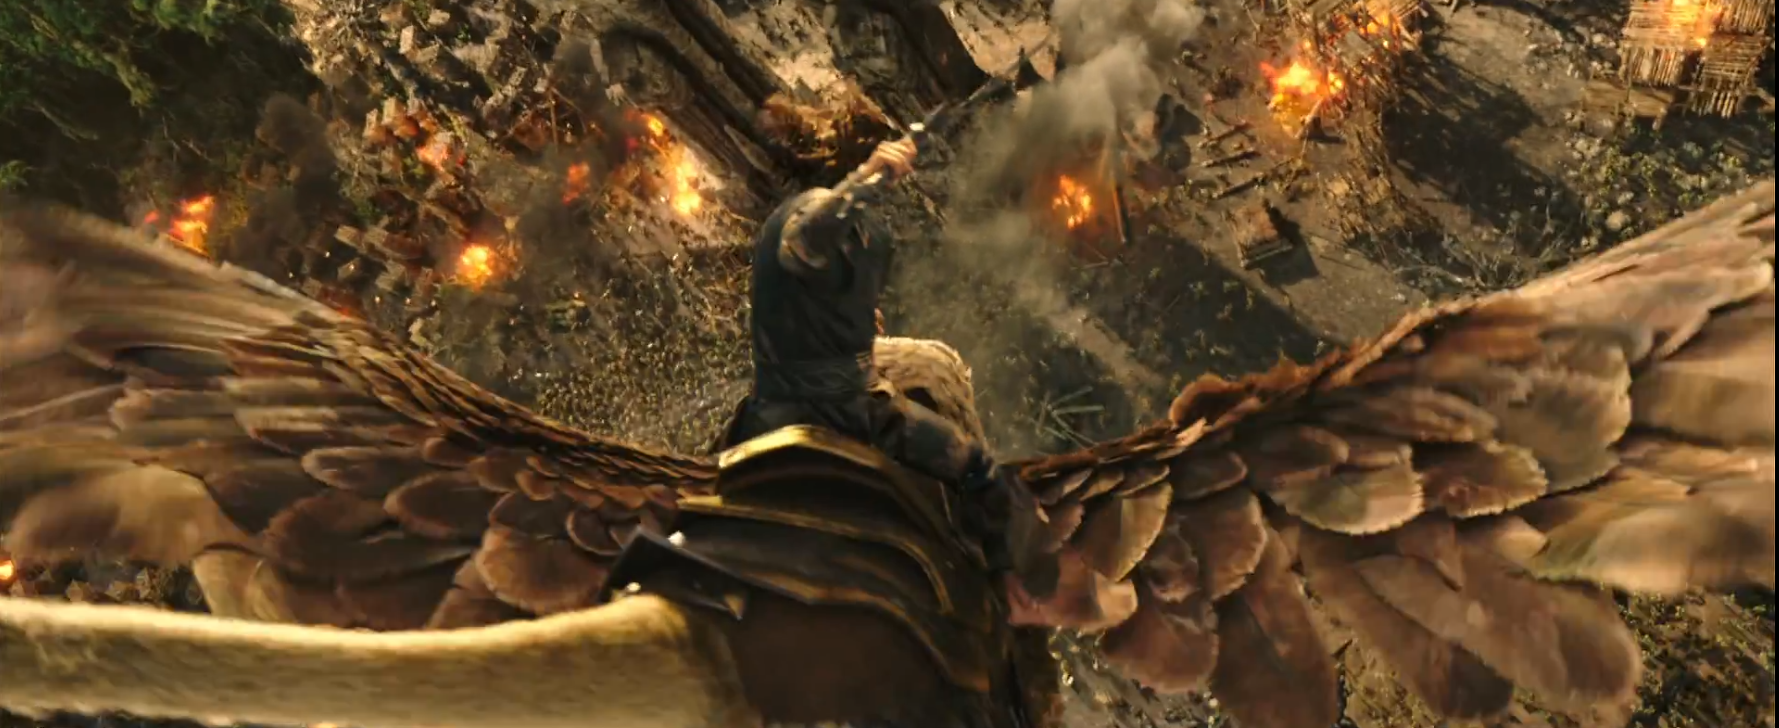 We analysed the Warcraft movie teaser in absurd detail and are now hyped